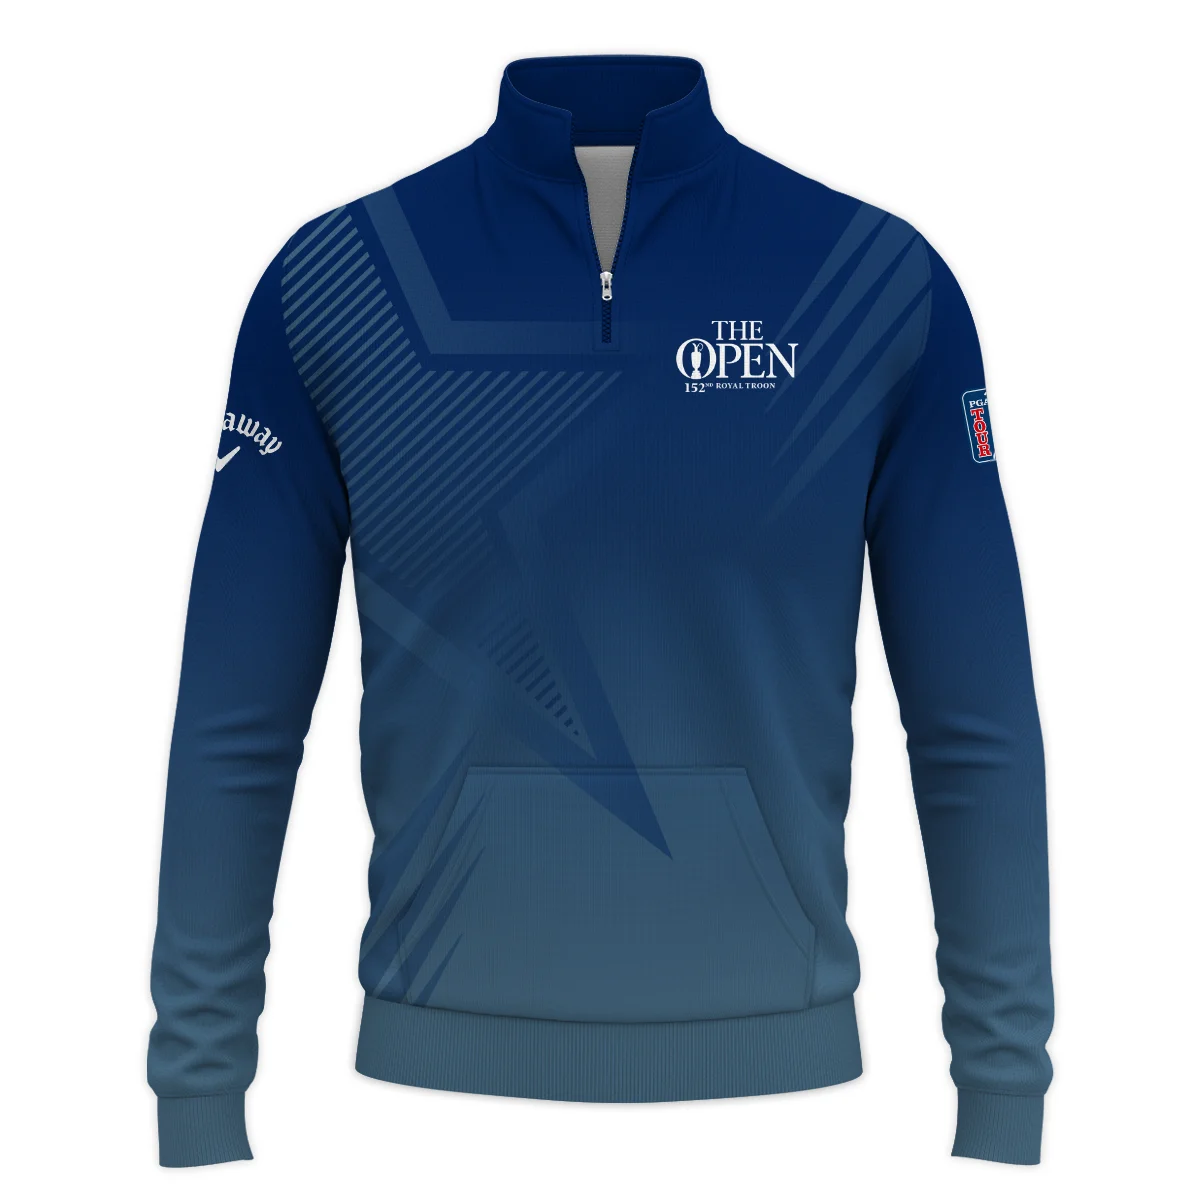 Callaway 152nd Open Championship Abstract Background Dark Blue Gradient Star Line Quarter-Zip Jacket All Over Prints HOTOP260624A04CLWSWZ